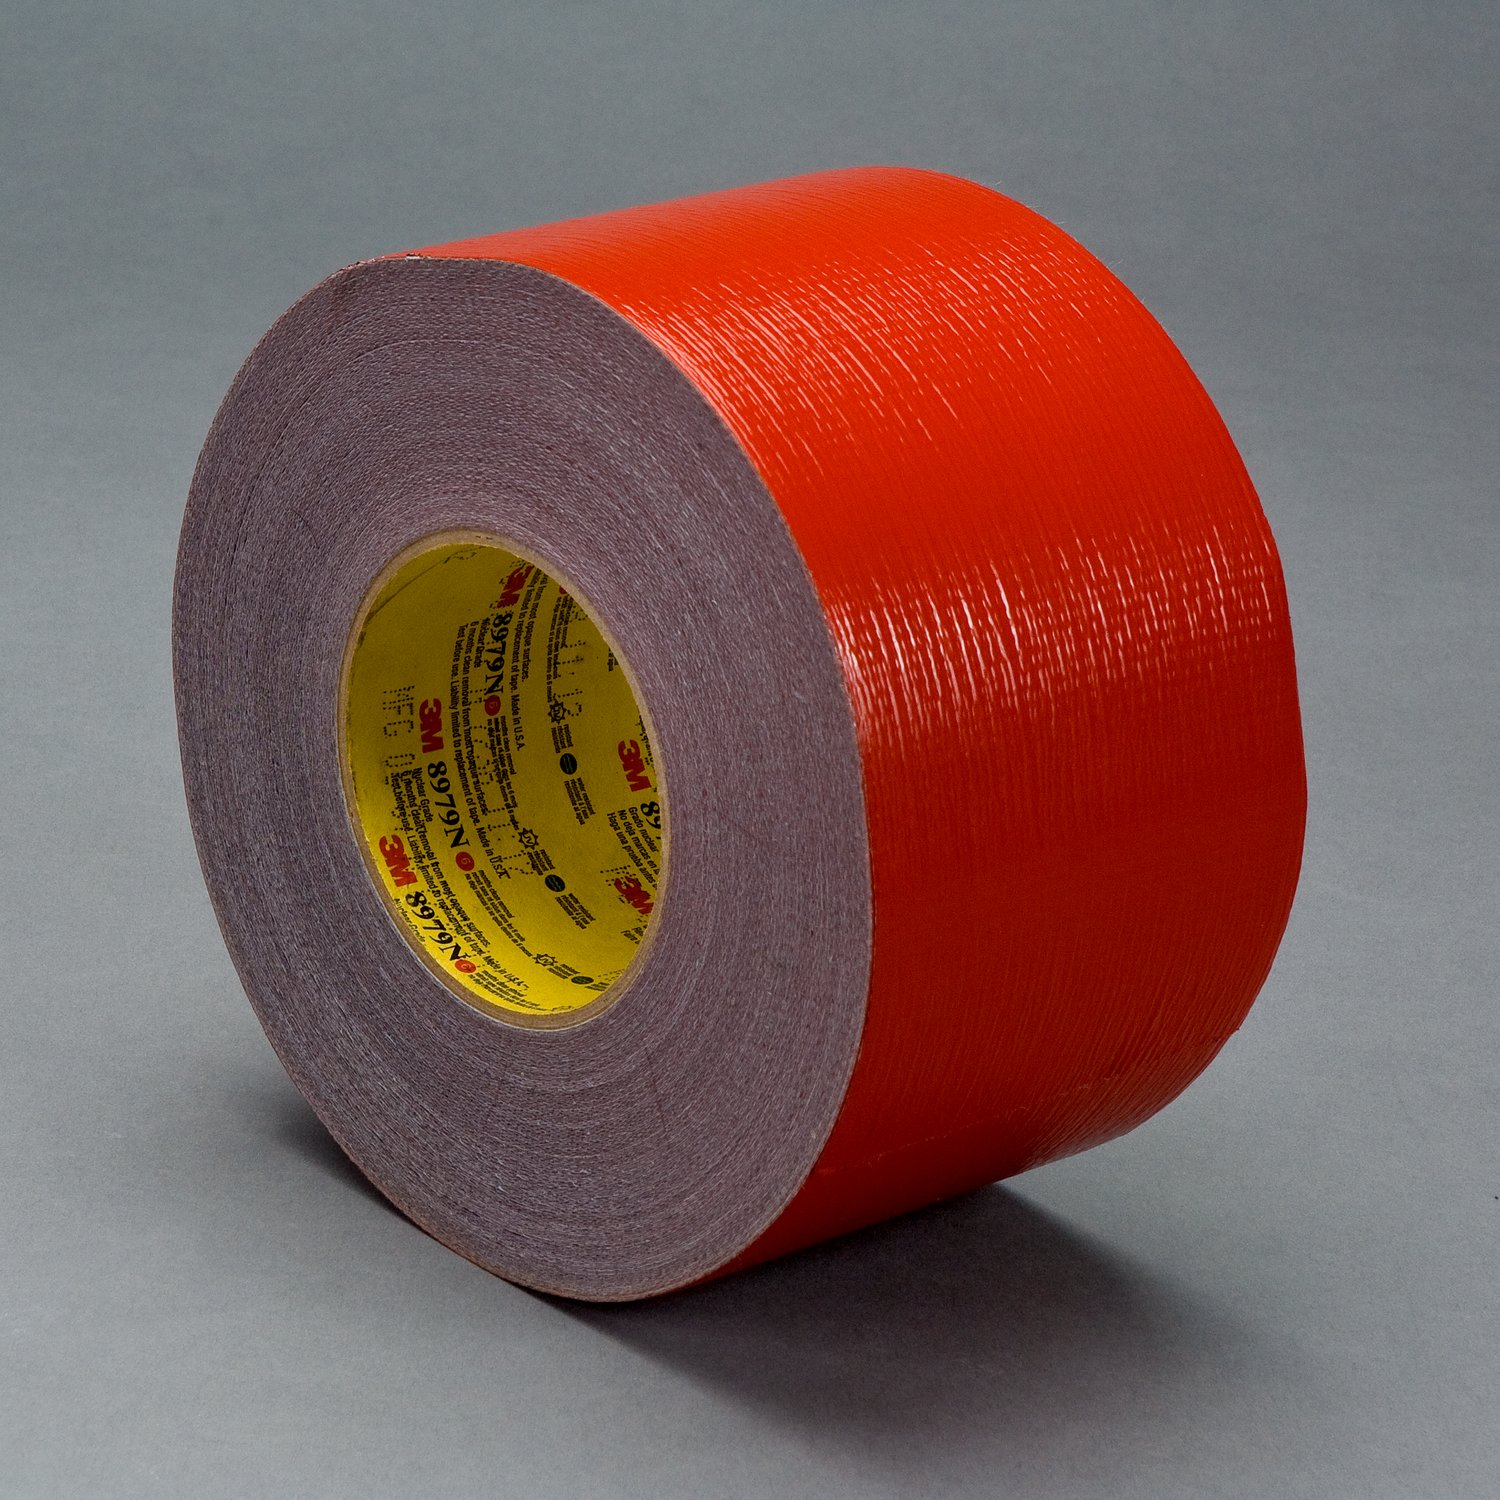 7000049014 - 3M Performance Plus Duct Tape 8979N, Red, 48 mm x 54.8 m, 12.1 mil,
24/Case